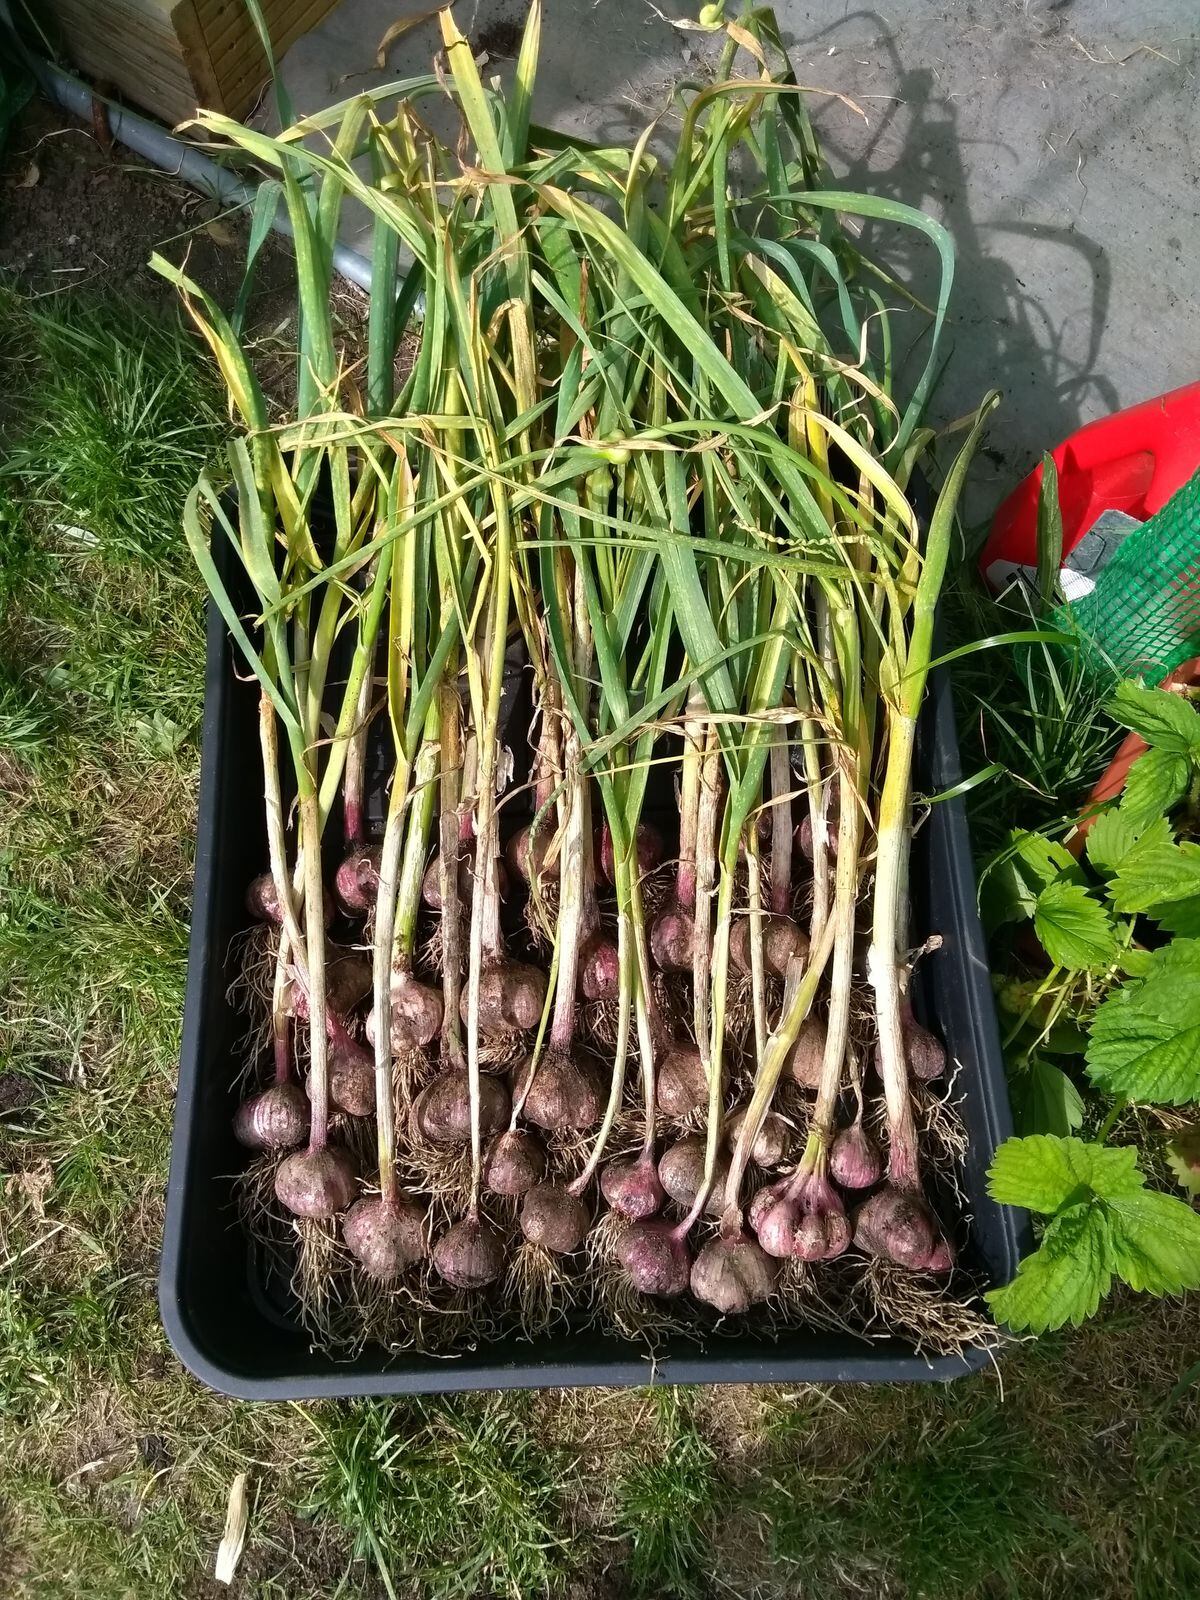 Garlic harvest. (Picture by Paul Savident) (30961373)